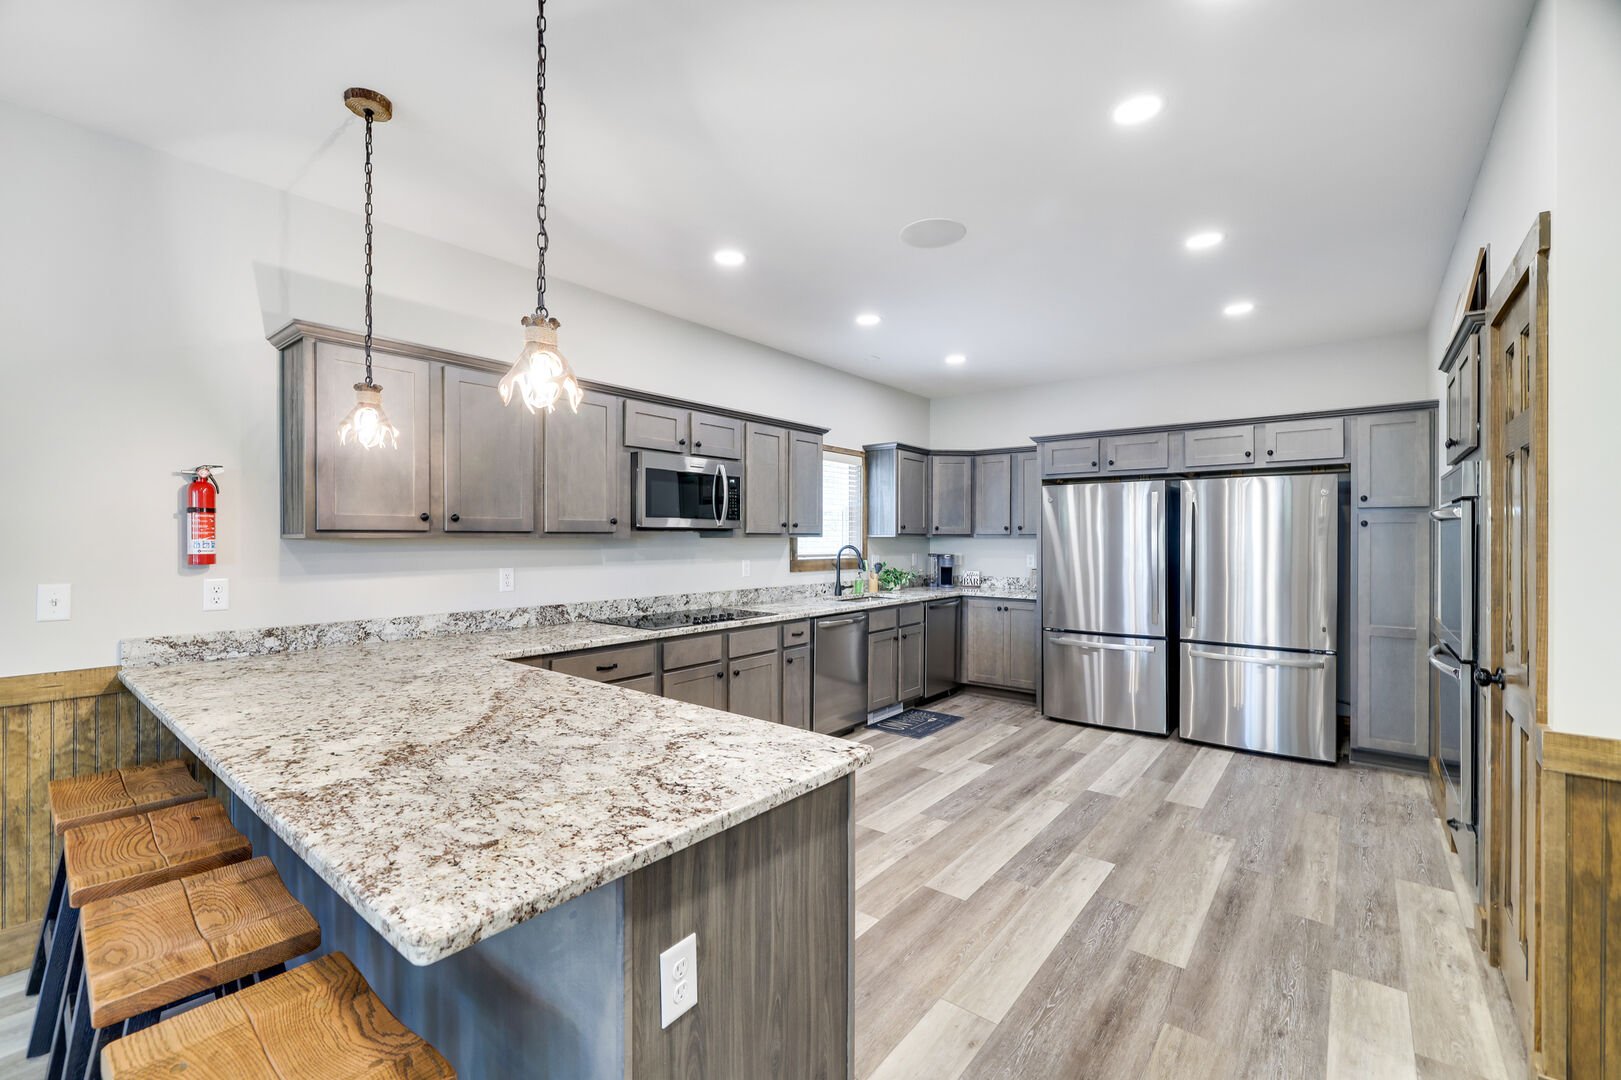 Double the Fun!
2 Refrigerators and 2 Ovens Means Plenty of Options for Cooking a Fantastic Meal in this Modern Kitchen. Taste Testers Will Be Ready for Treats at the Peninsula with Barstool Seating for 4.